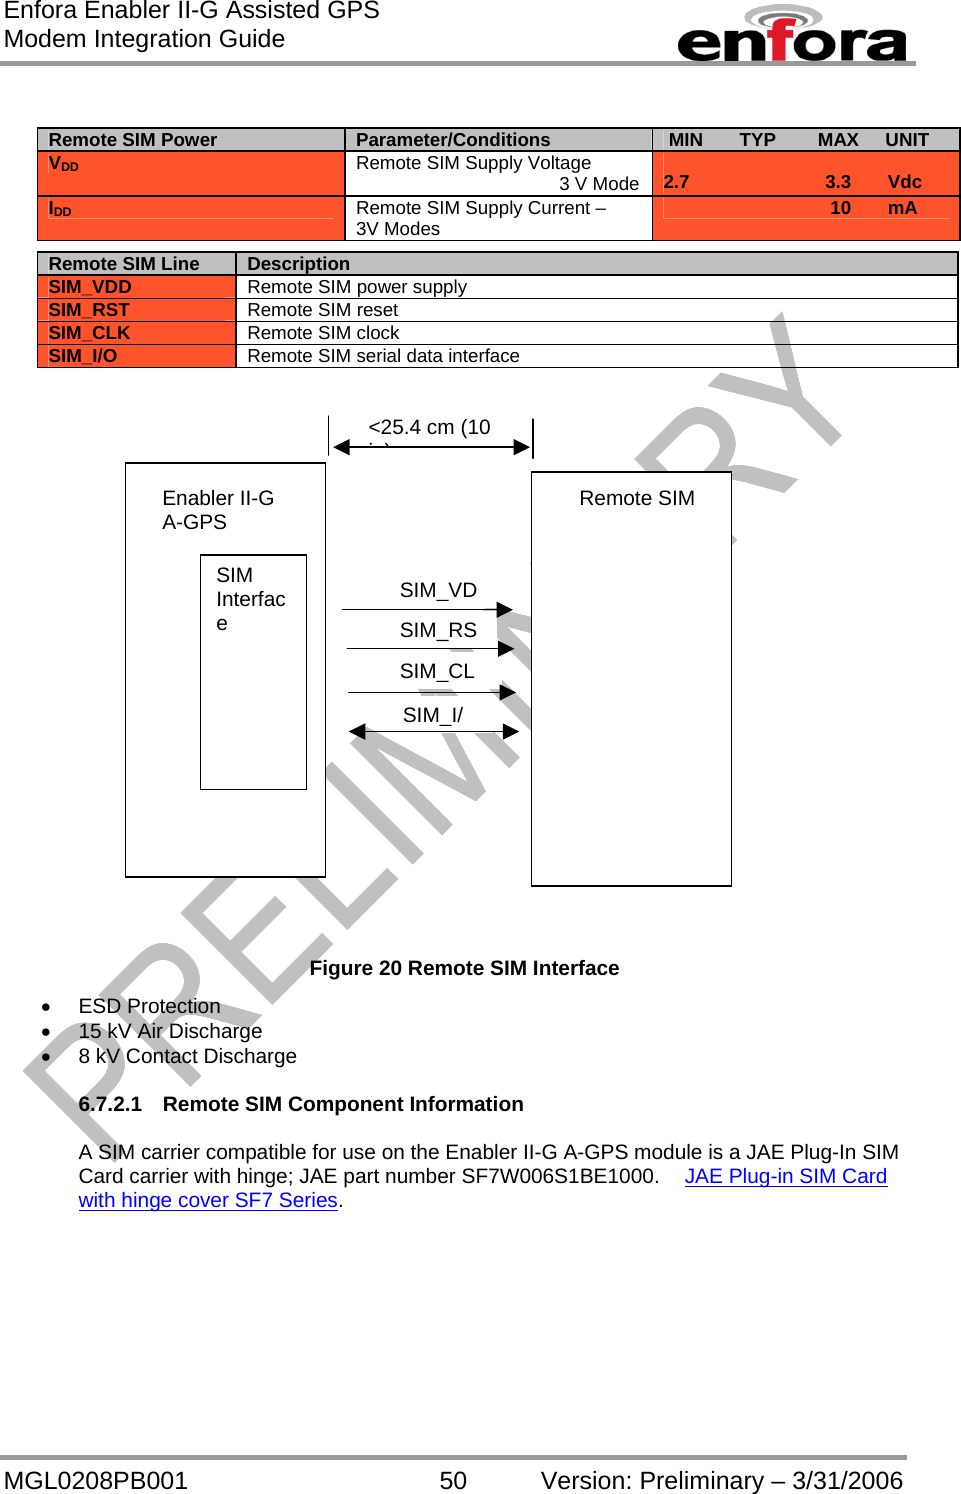 Enfora Enabler II-G Assisted GPS Modem Integration Guide MGL0208PB001 50 Version: Preliminary – 3/31/2006   Remote SIM Power Parameter/Conditions  MIN       TYP        MAX     UNIT VDD  Remote SIM Supply Voltage                                        3 V Mode  2.7                          3.3       Vdc        IDD Remote SIM Supply Current –  3V Modes                                  10       mA                         Figure 20 Remote SIM Interface •  ESD Protection •  15 kV Air Discharge •  8 kV Contact Discharge  6.7.2.1  Remote SIM Component Information  A SIM carrier compatible for use on the Enabler II-G A-GPS module is a JAE Plug-In SIM Card carrier with hinge; JAE part number SF7W006S1BE1000.  JAE Plug-in SIM Card with hinge cover SF7 Series.   Remote SIM Line Description SIM_VDD Remote SIM power supply SIM_RST  Remote SIM reset SIM_CLK  Remote SIM clock SIM_I/O  Remote SIM serial data interface SIM_CL&lt;25.4 cm (10 i)SIM_I/SIM_RSSIM_VDEnabler II-G A-GPS SIM Interface Remote SIM